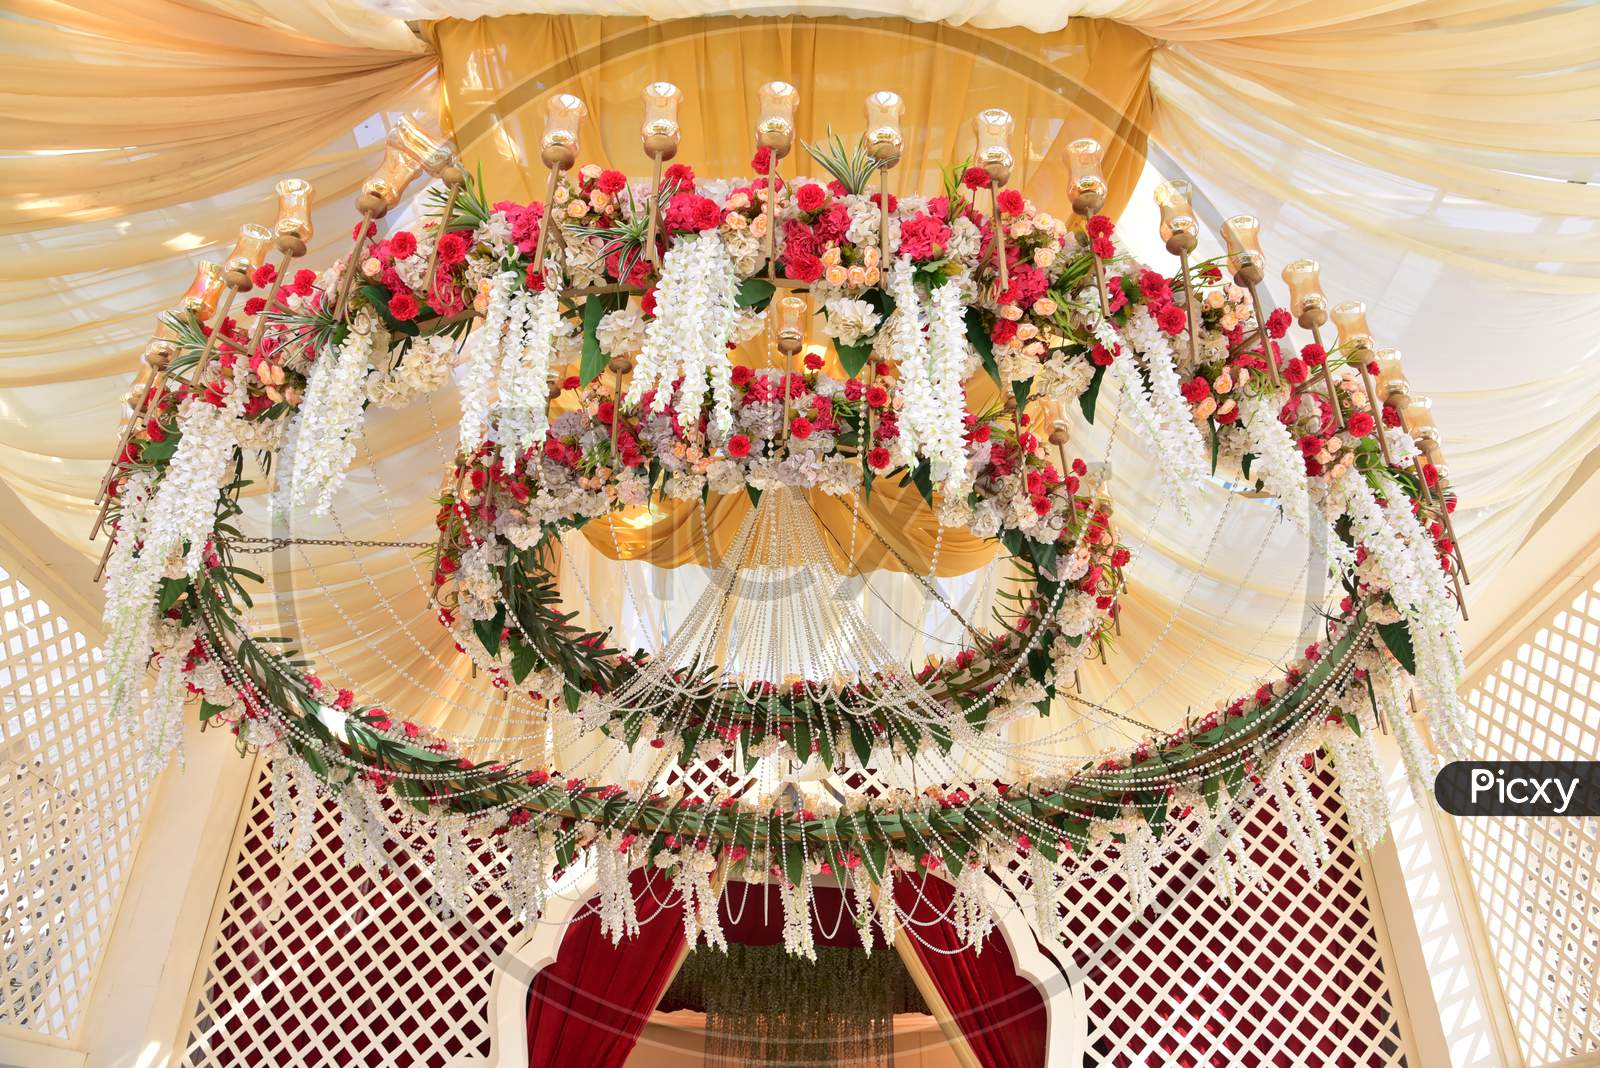 Beautiful ceiling decoration in the weeding ceremony